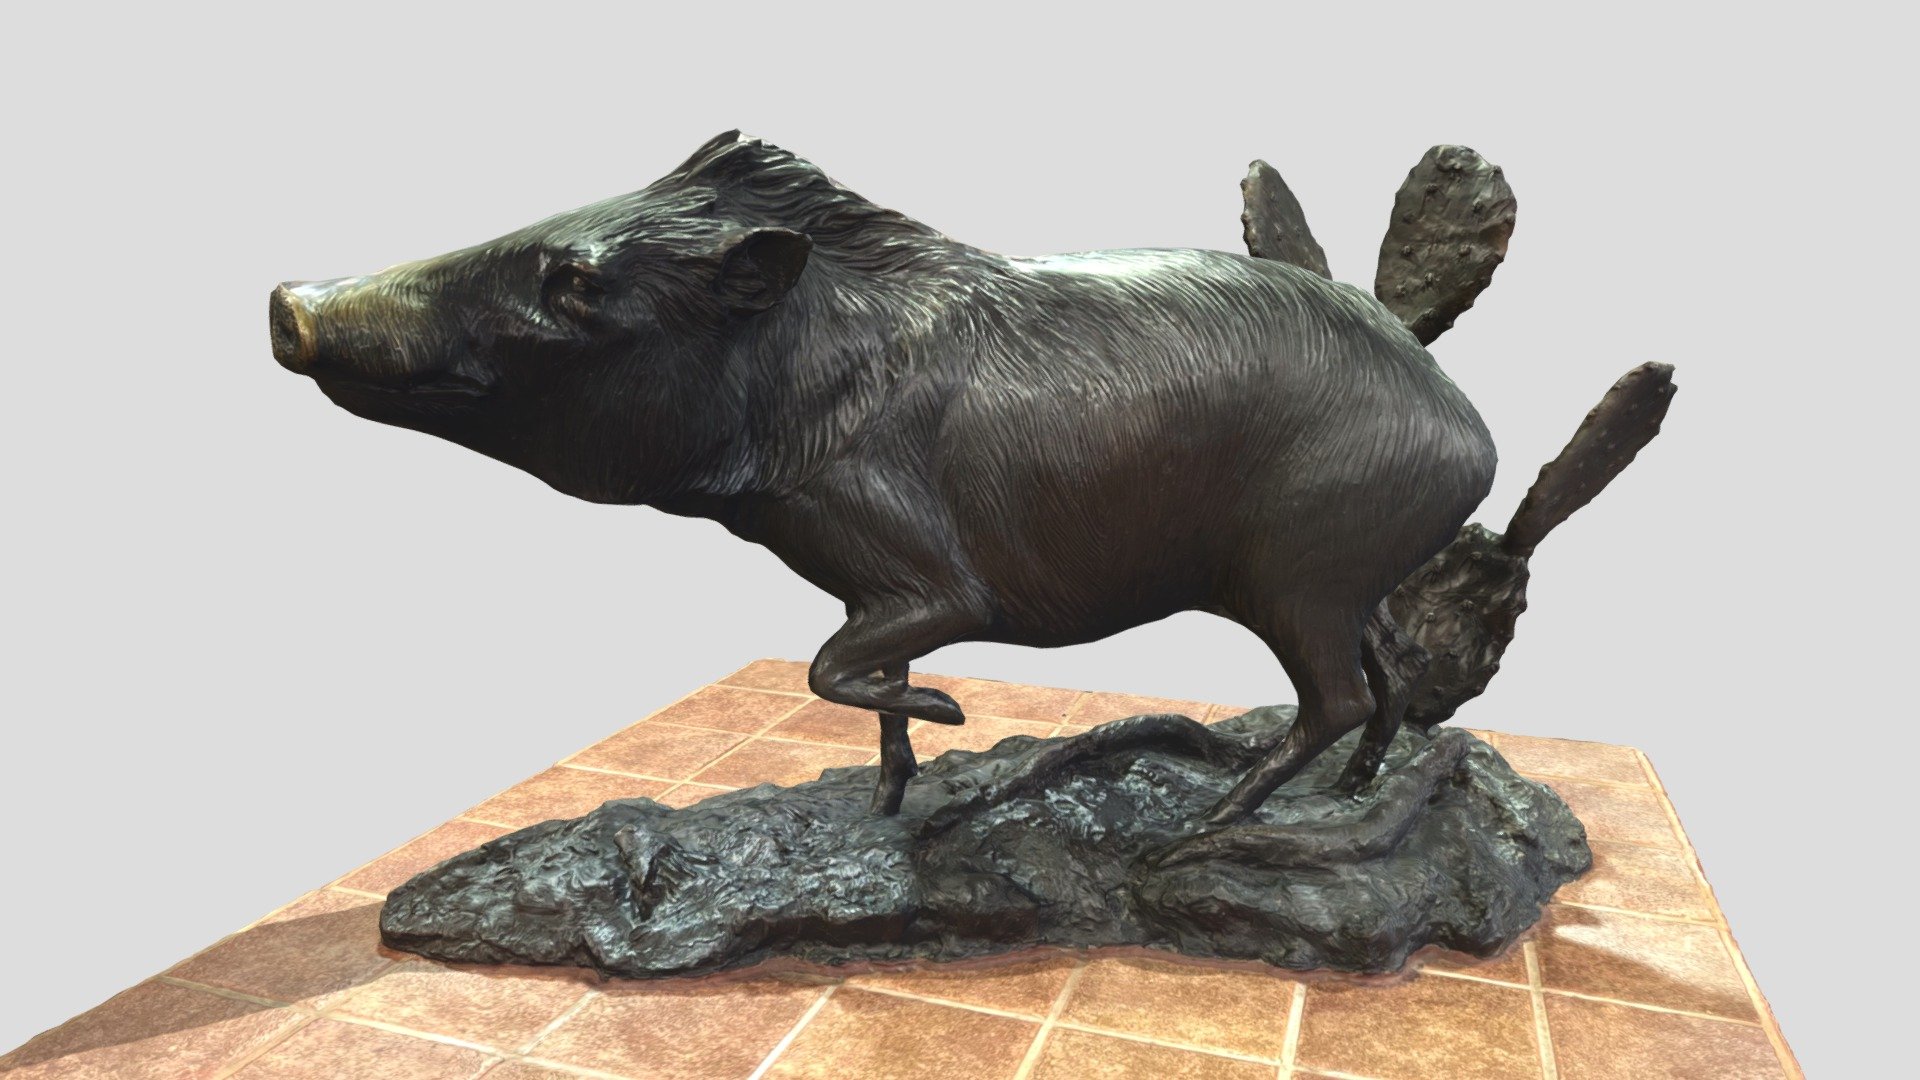 Texas A&amp;M University-Kingsville Frank H. Dotterweich College of Engineering College of Engineering Javelina Statue

*NOTICE: These models will not be shared, sold, or duplicated. They are intended for viewing purposes only. * - TAMU-K College of Engineering Javelina Statue - 3D model by Oscar Villarreal (@ovzero) 3d model